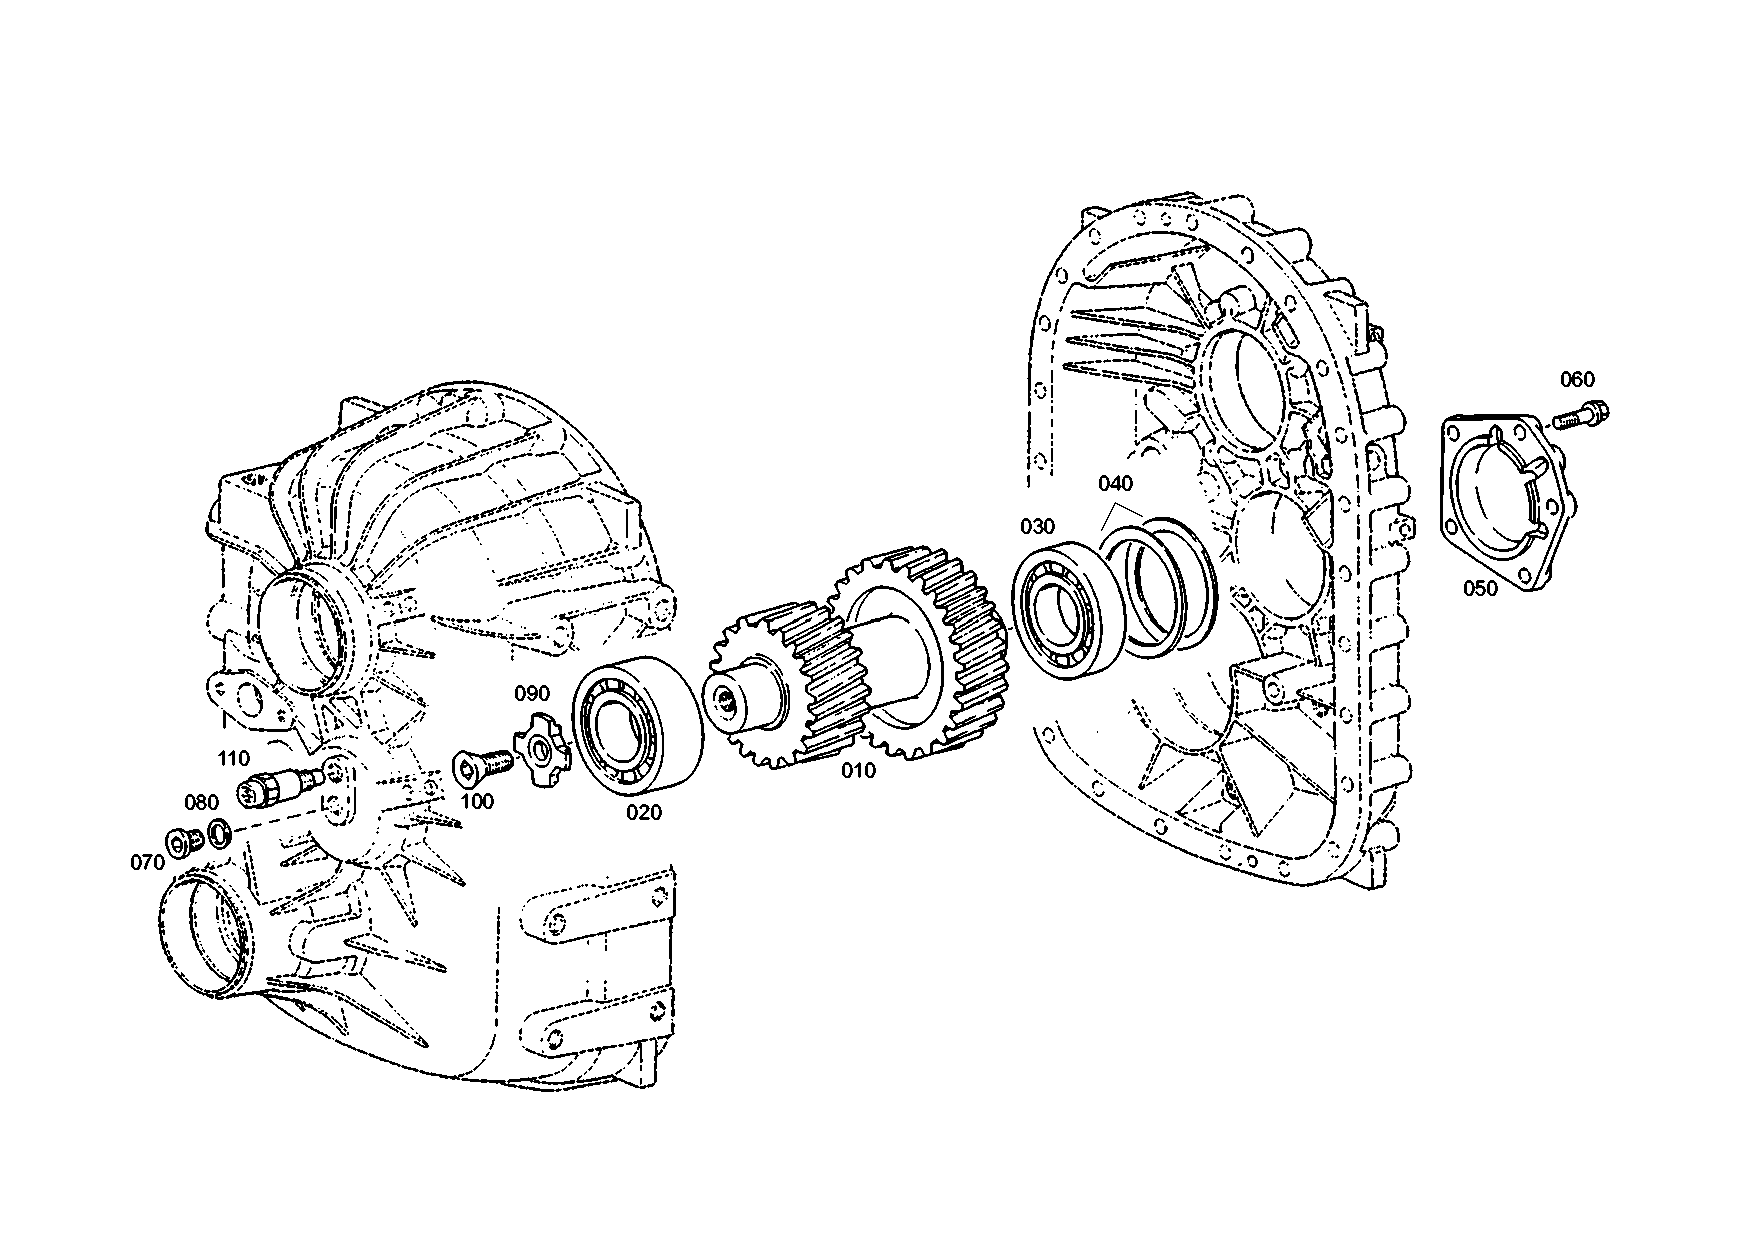 drawing for MARMON Herring MVG751061 - DOUBLE GEAR (figure 4)